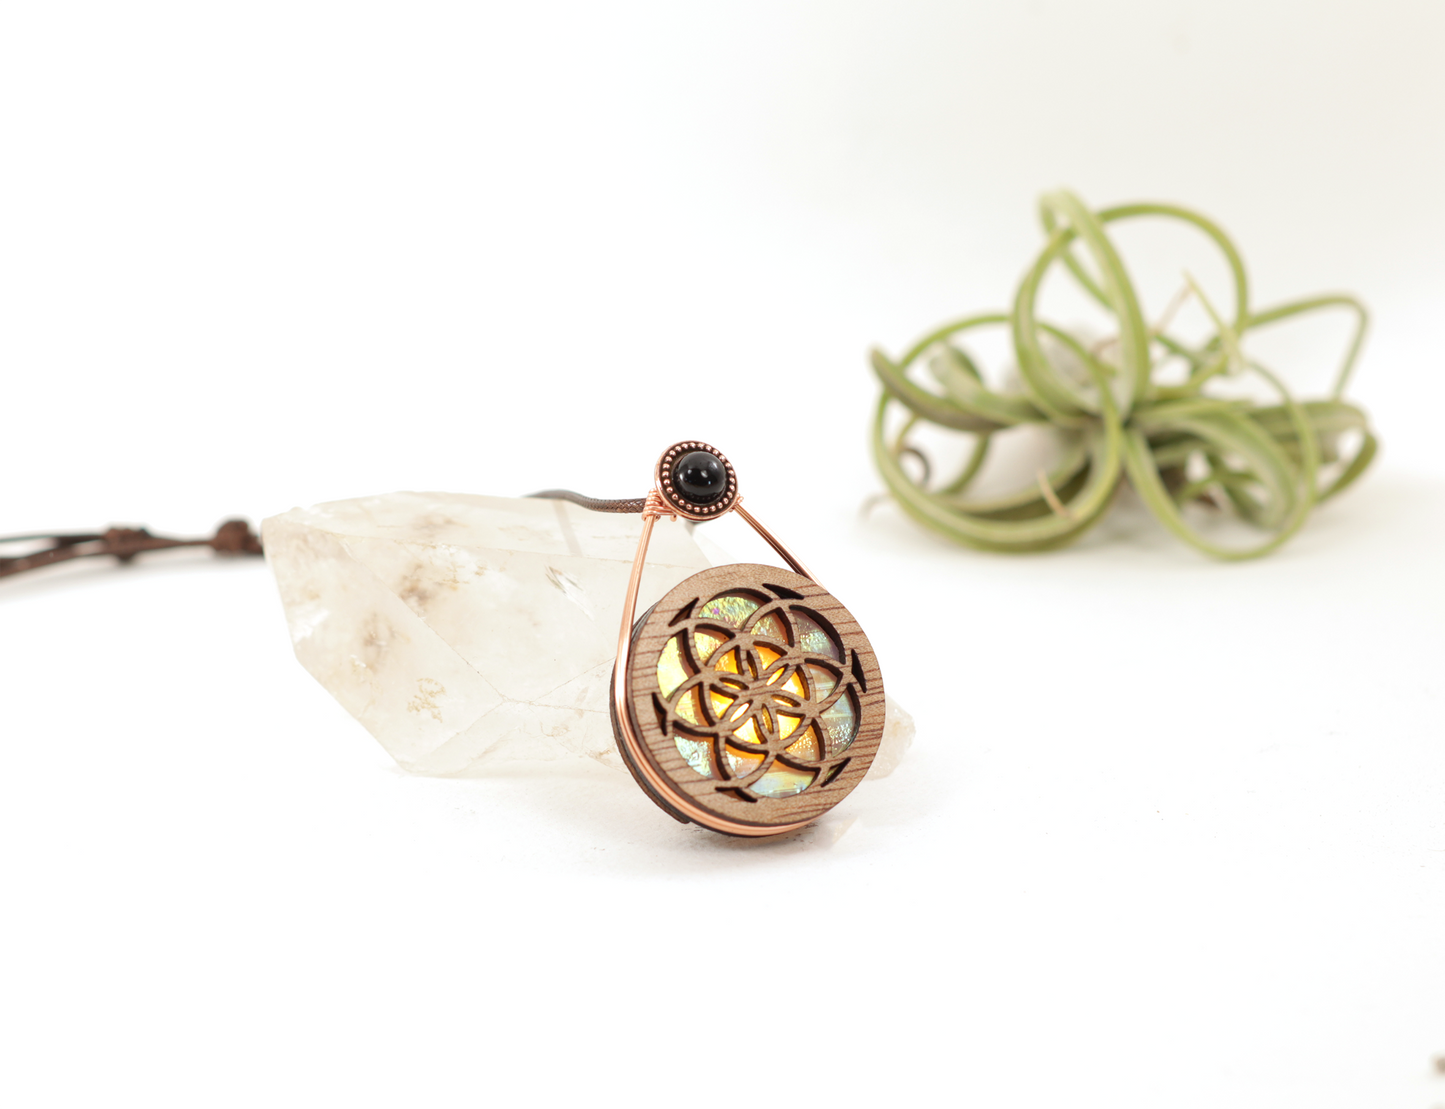 Glowing Iridescent Stained Glass LED Wire Wrapped Pendant | Seed Of life